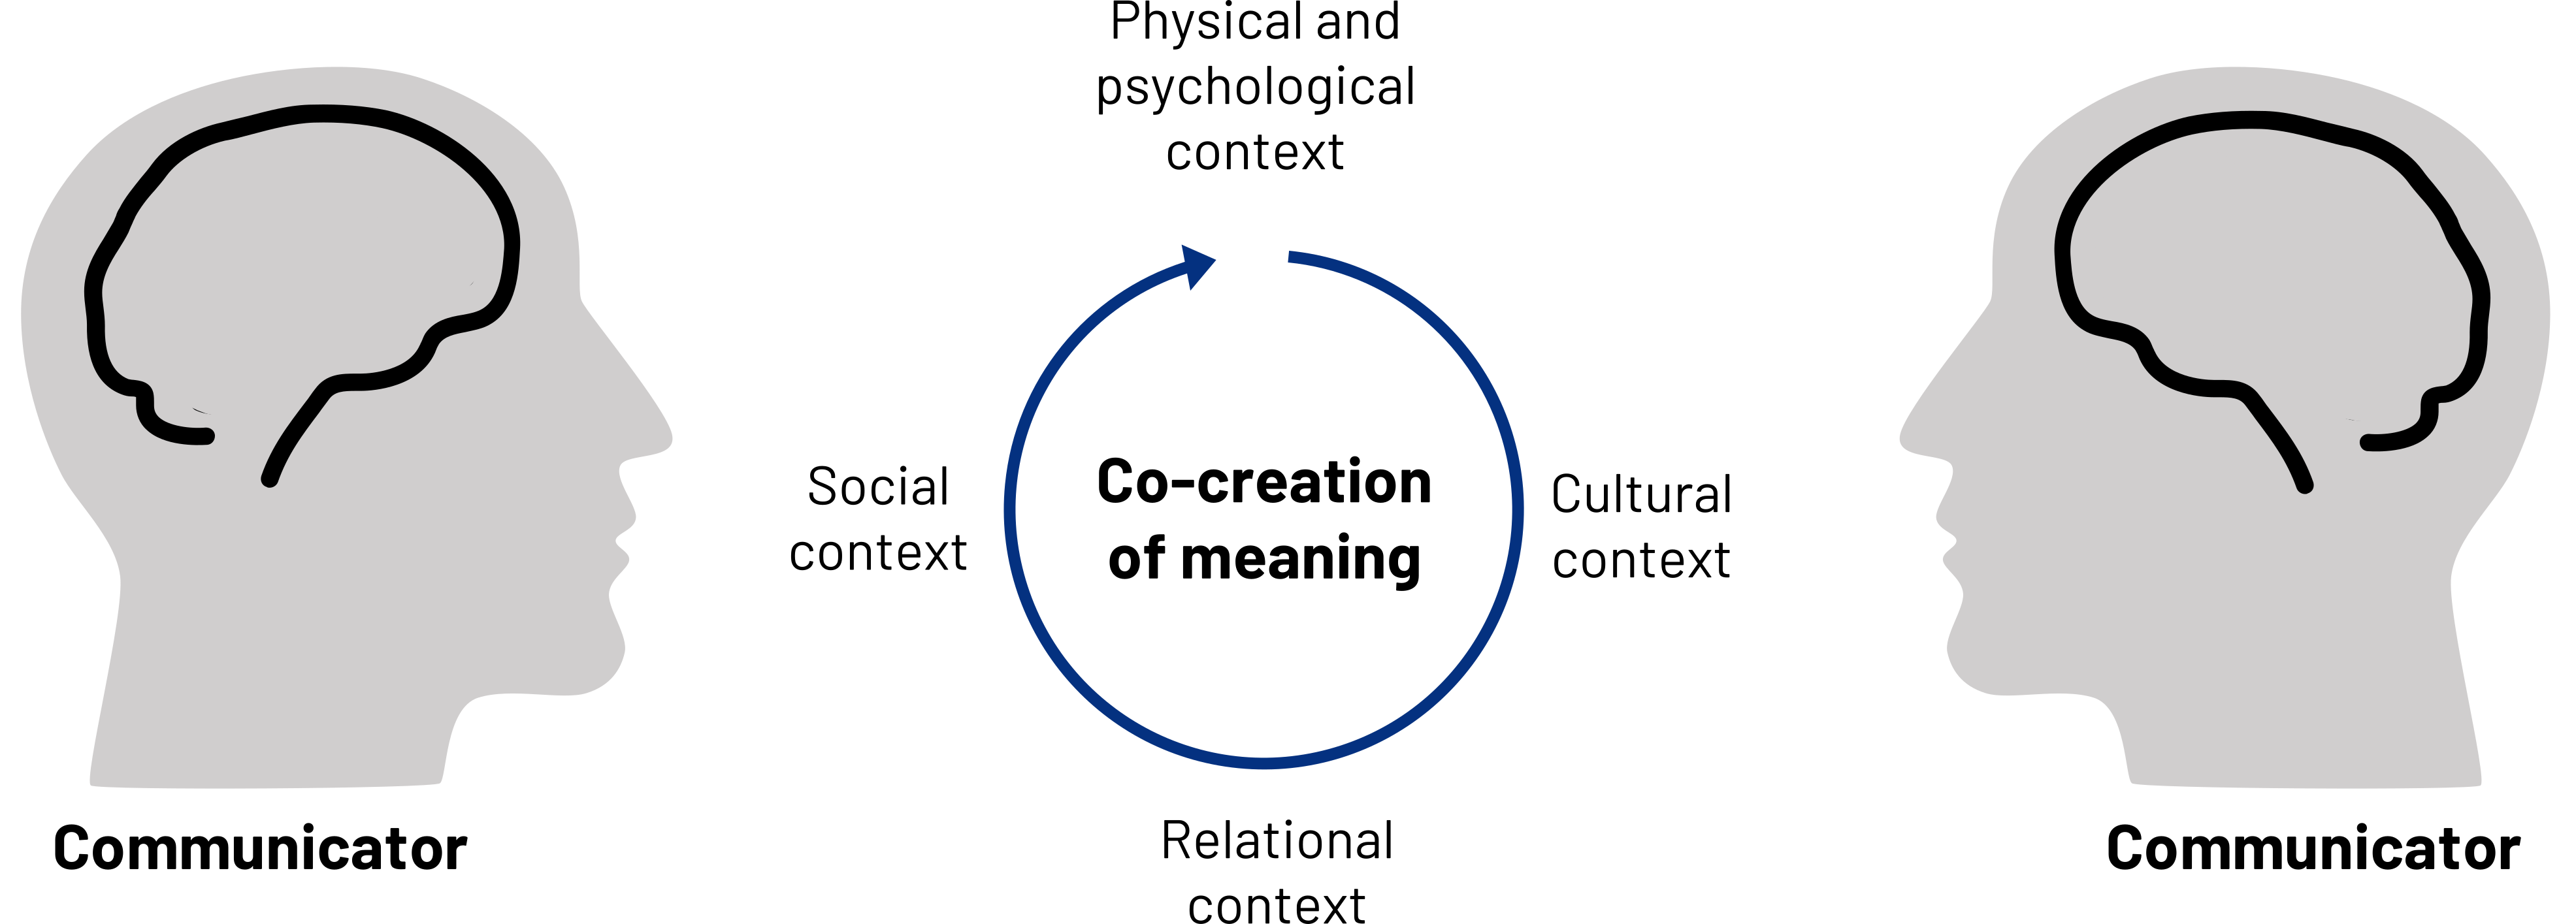 Two heads face eachother, both labeled communicator. A circle with clockwise arrows is in the center. Center of circle: Co-creation of meaning. Top: Physical and psychological context. Right: Cultural context. Bottom: Relational context. Left: Socail context.